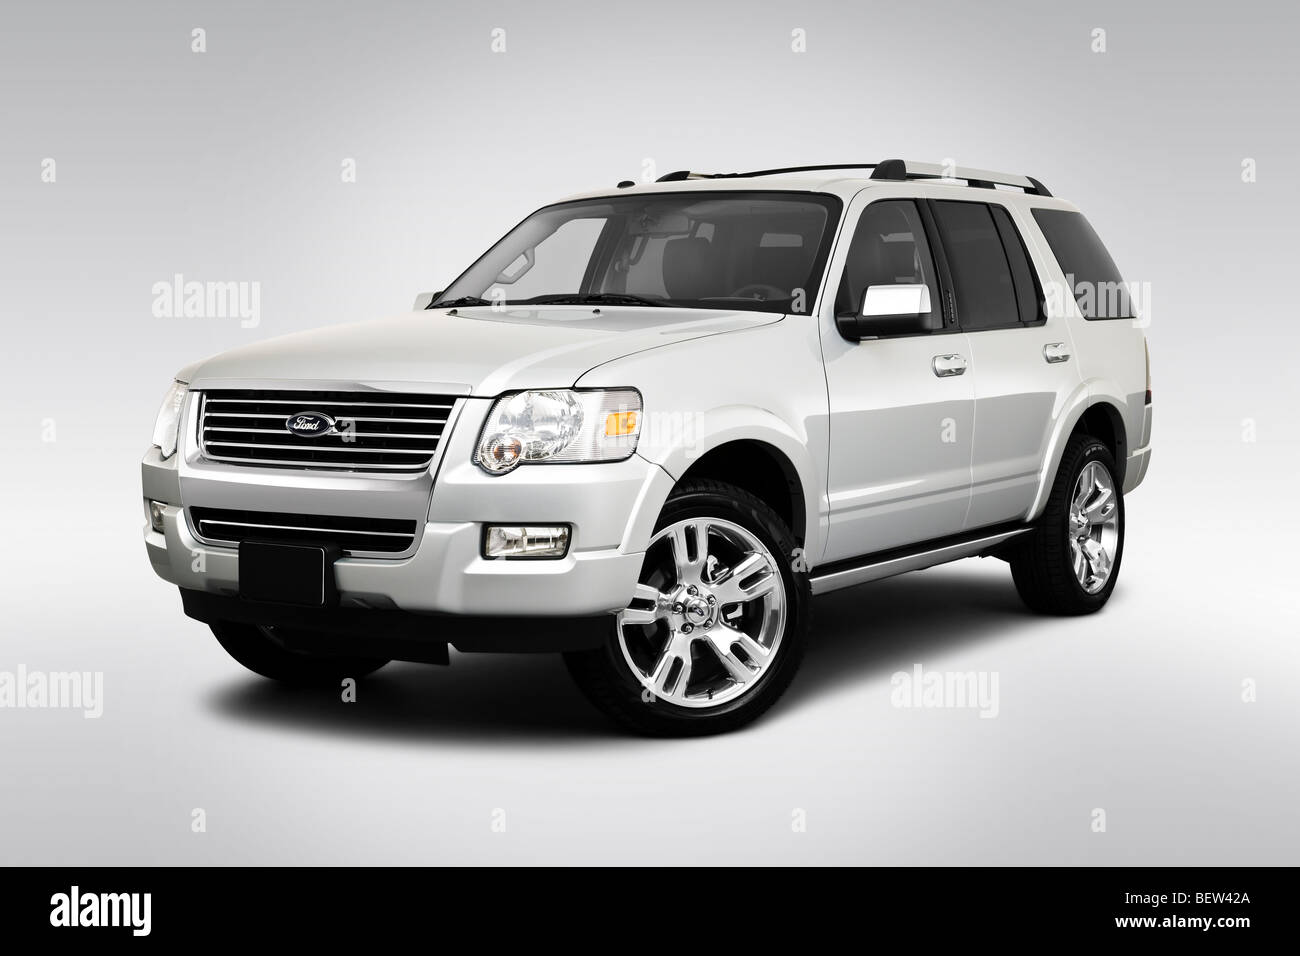 2010 Ford Explorer Limited in Silver - Front angle view Stock Photo - Alamy